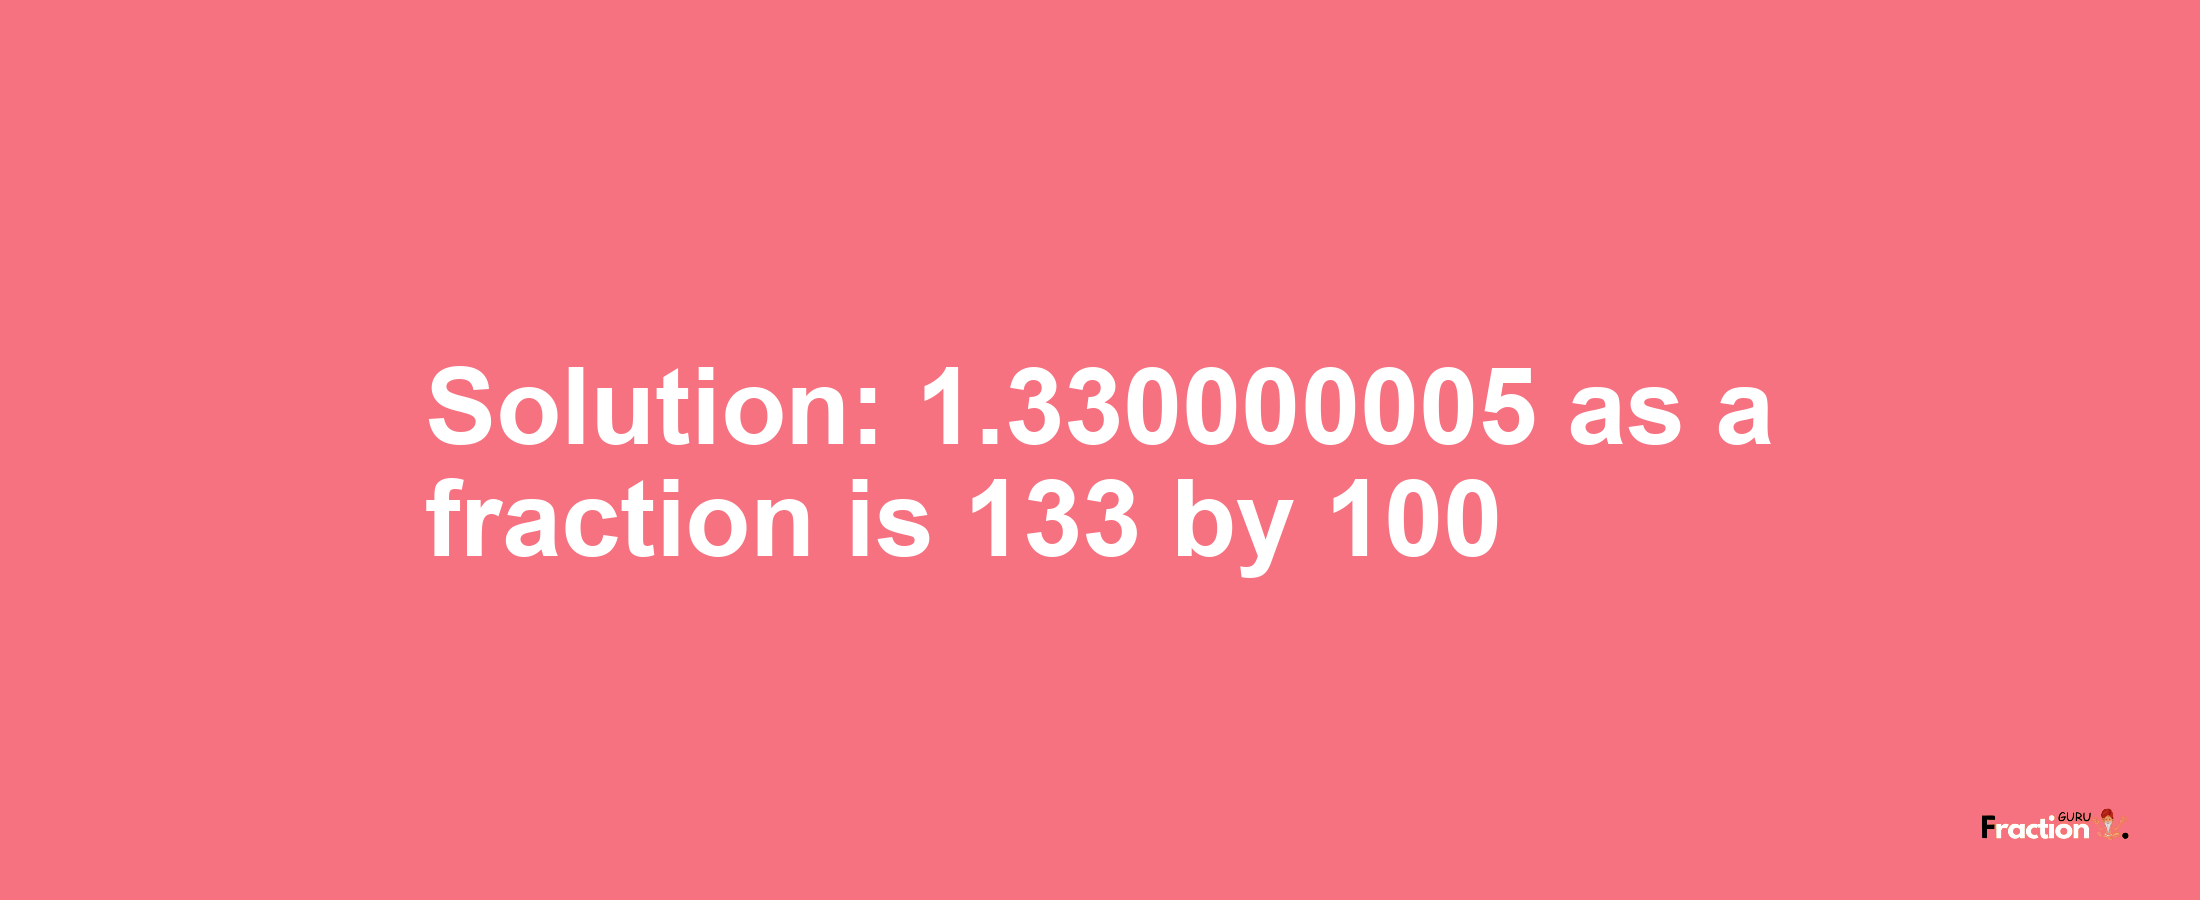 Solution:1.330000005 as a fraction is 133/100